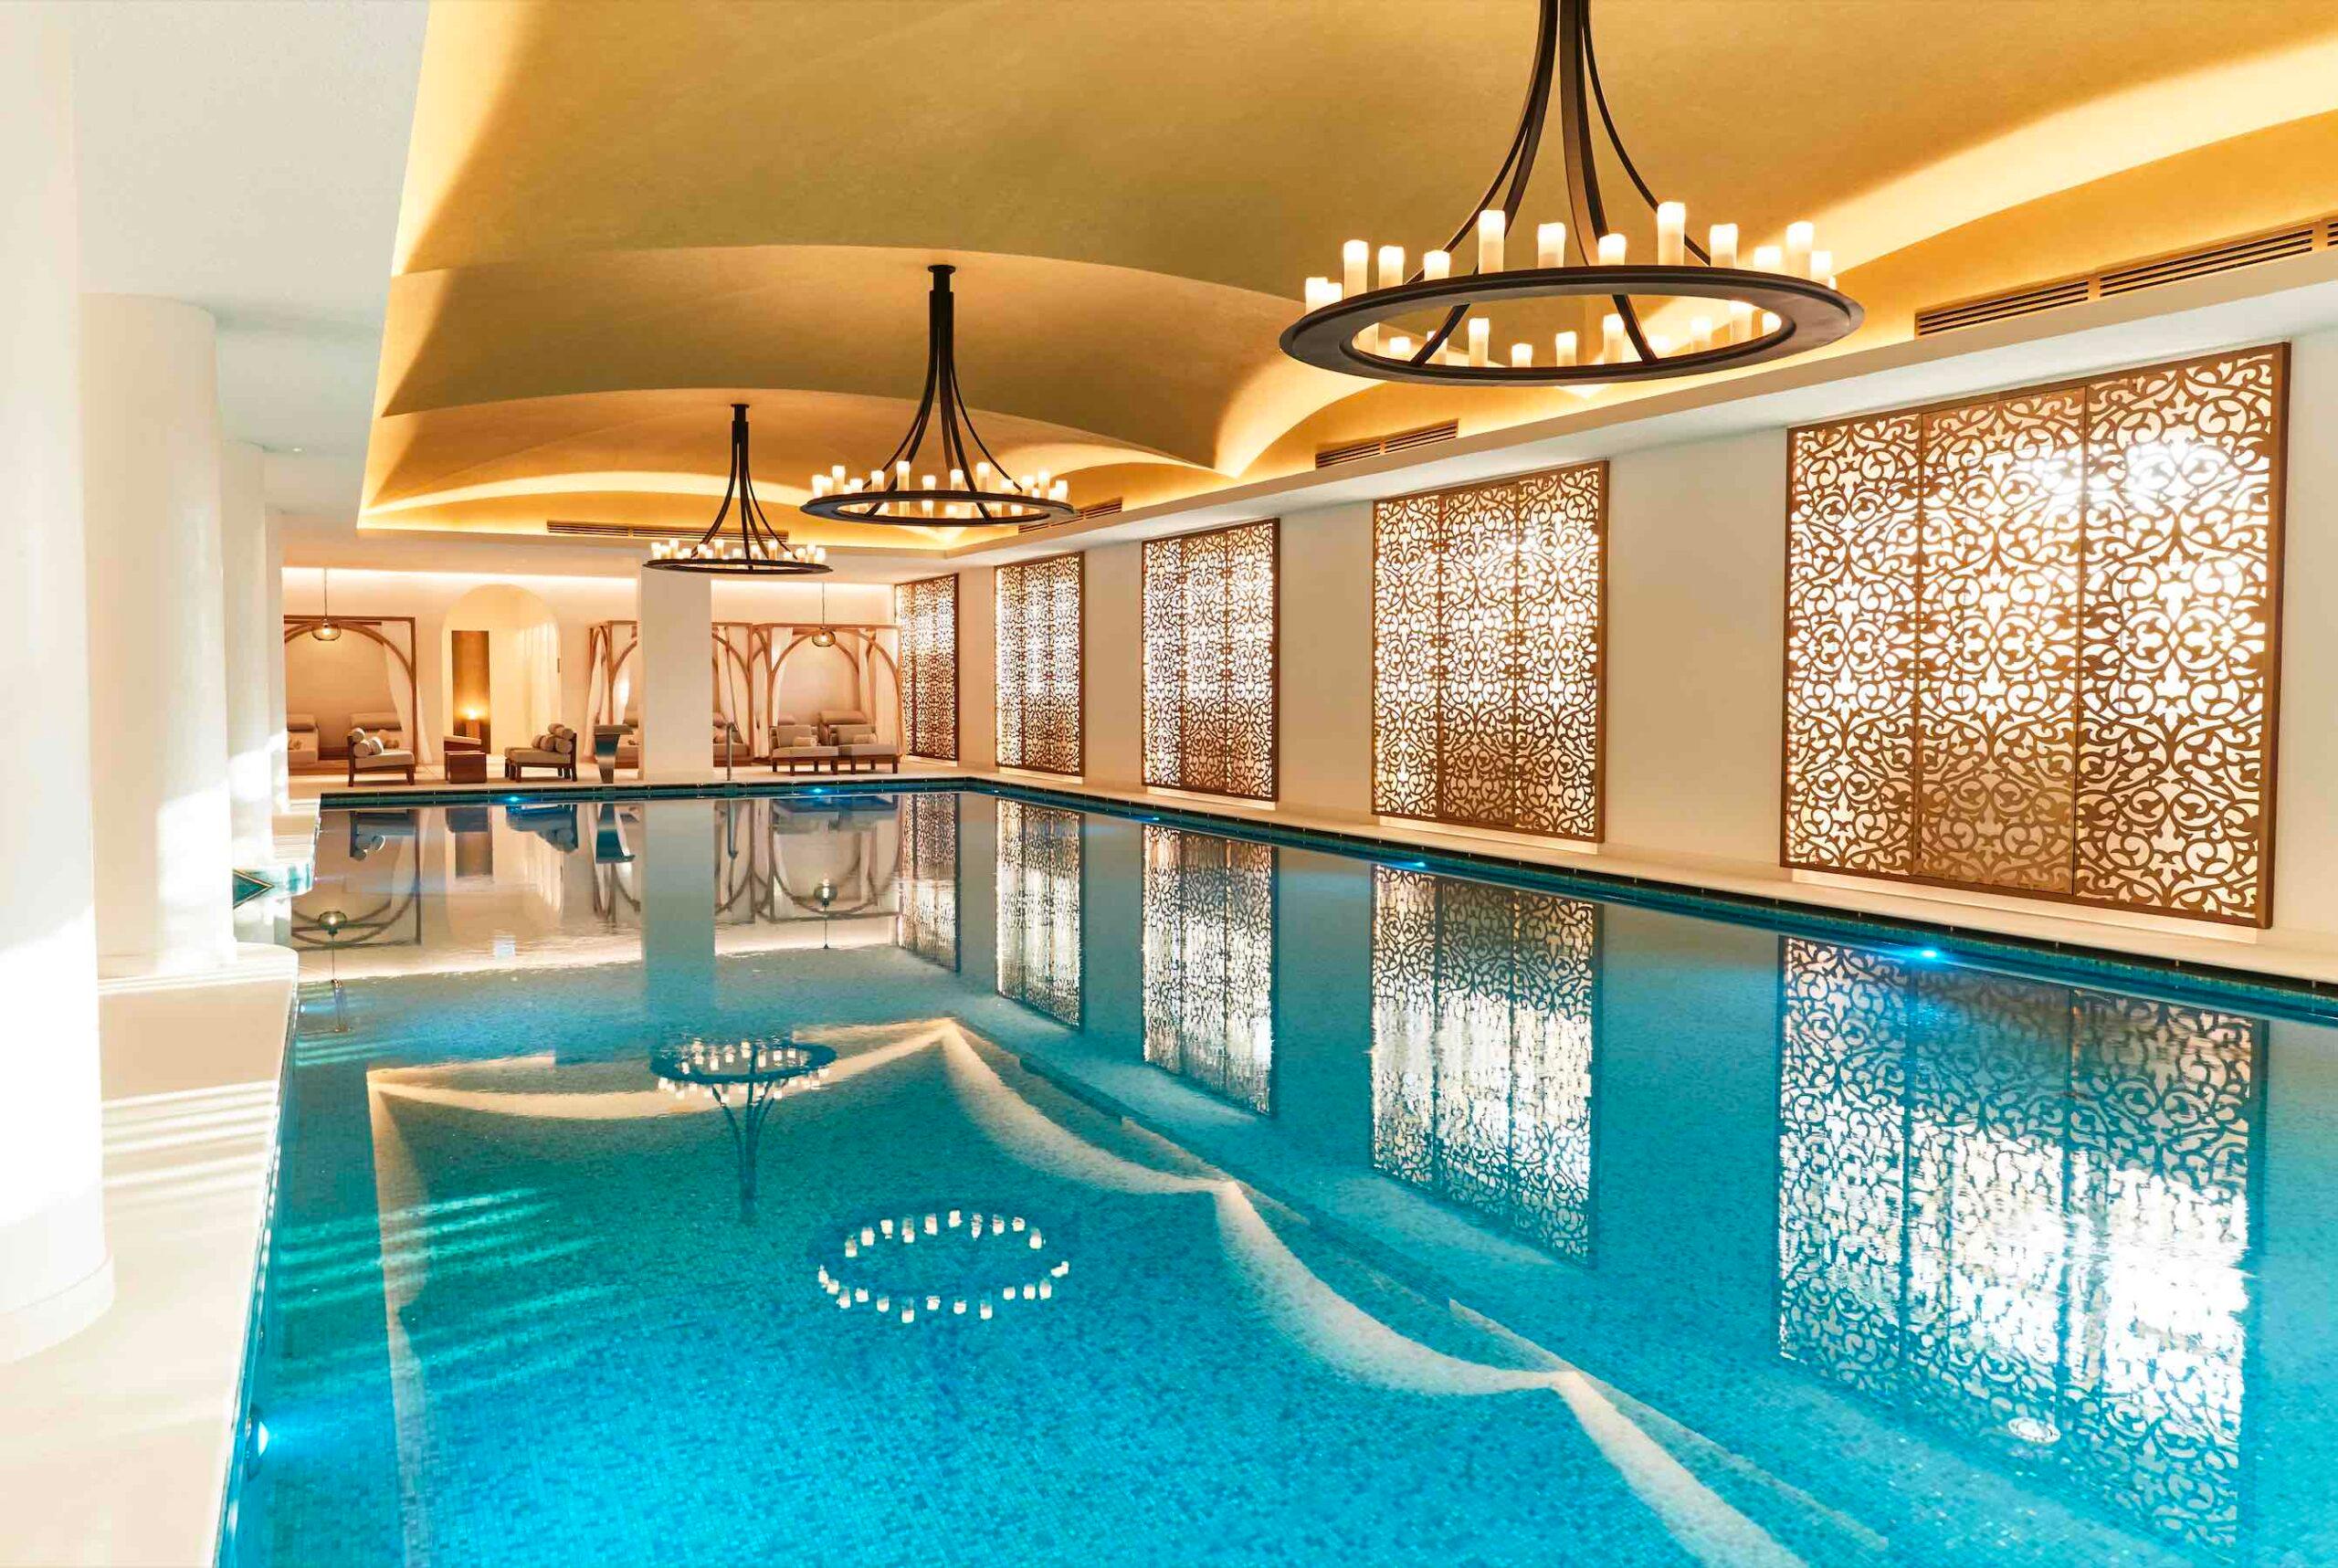 Cinq Mondes Spa Review: Unrivalled relaxation at Raffles The Palm Dubai